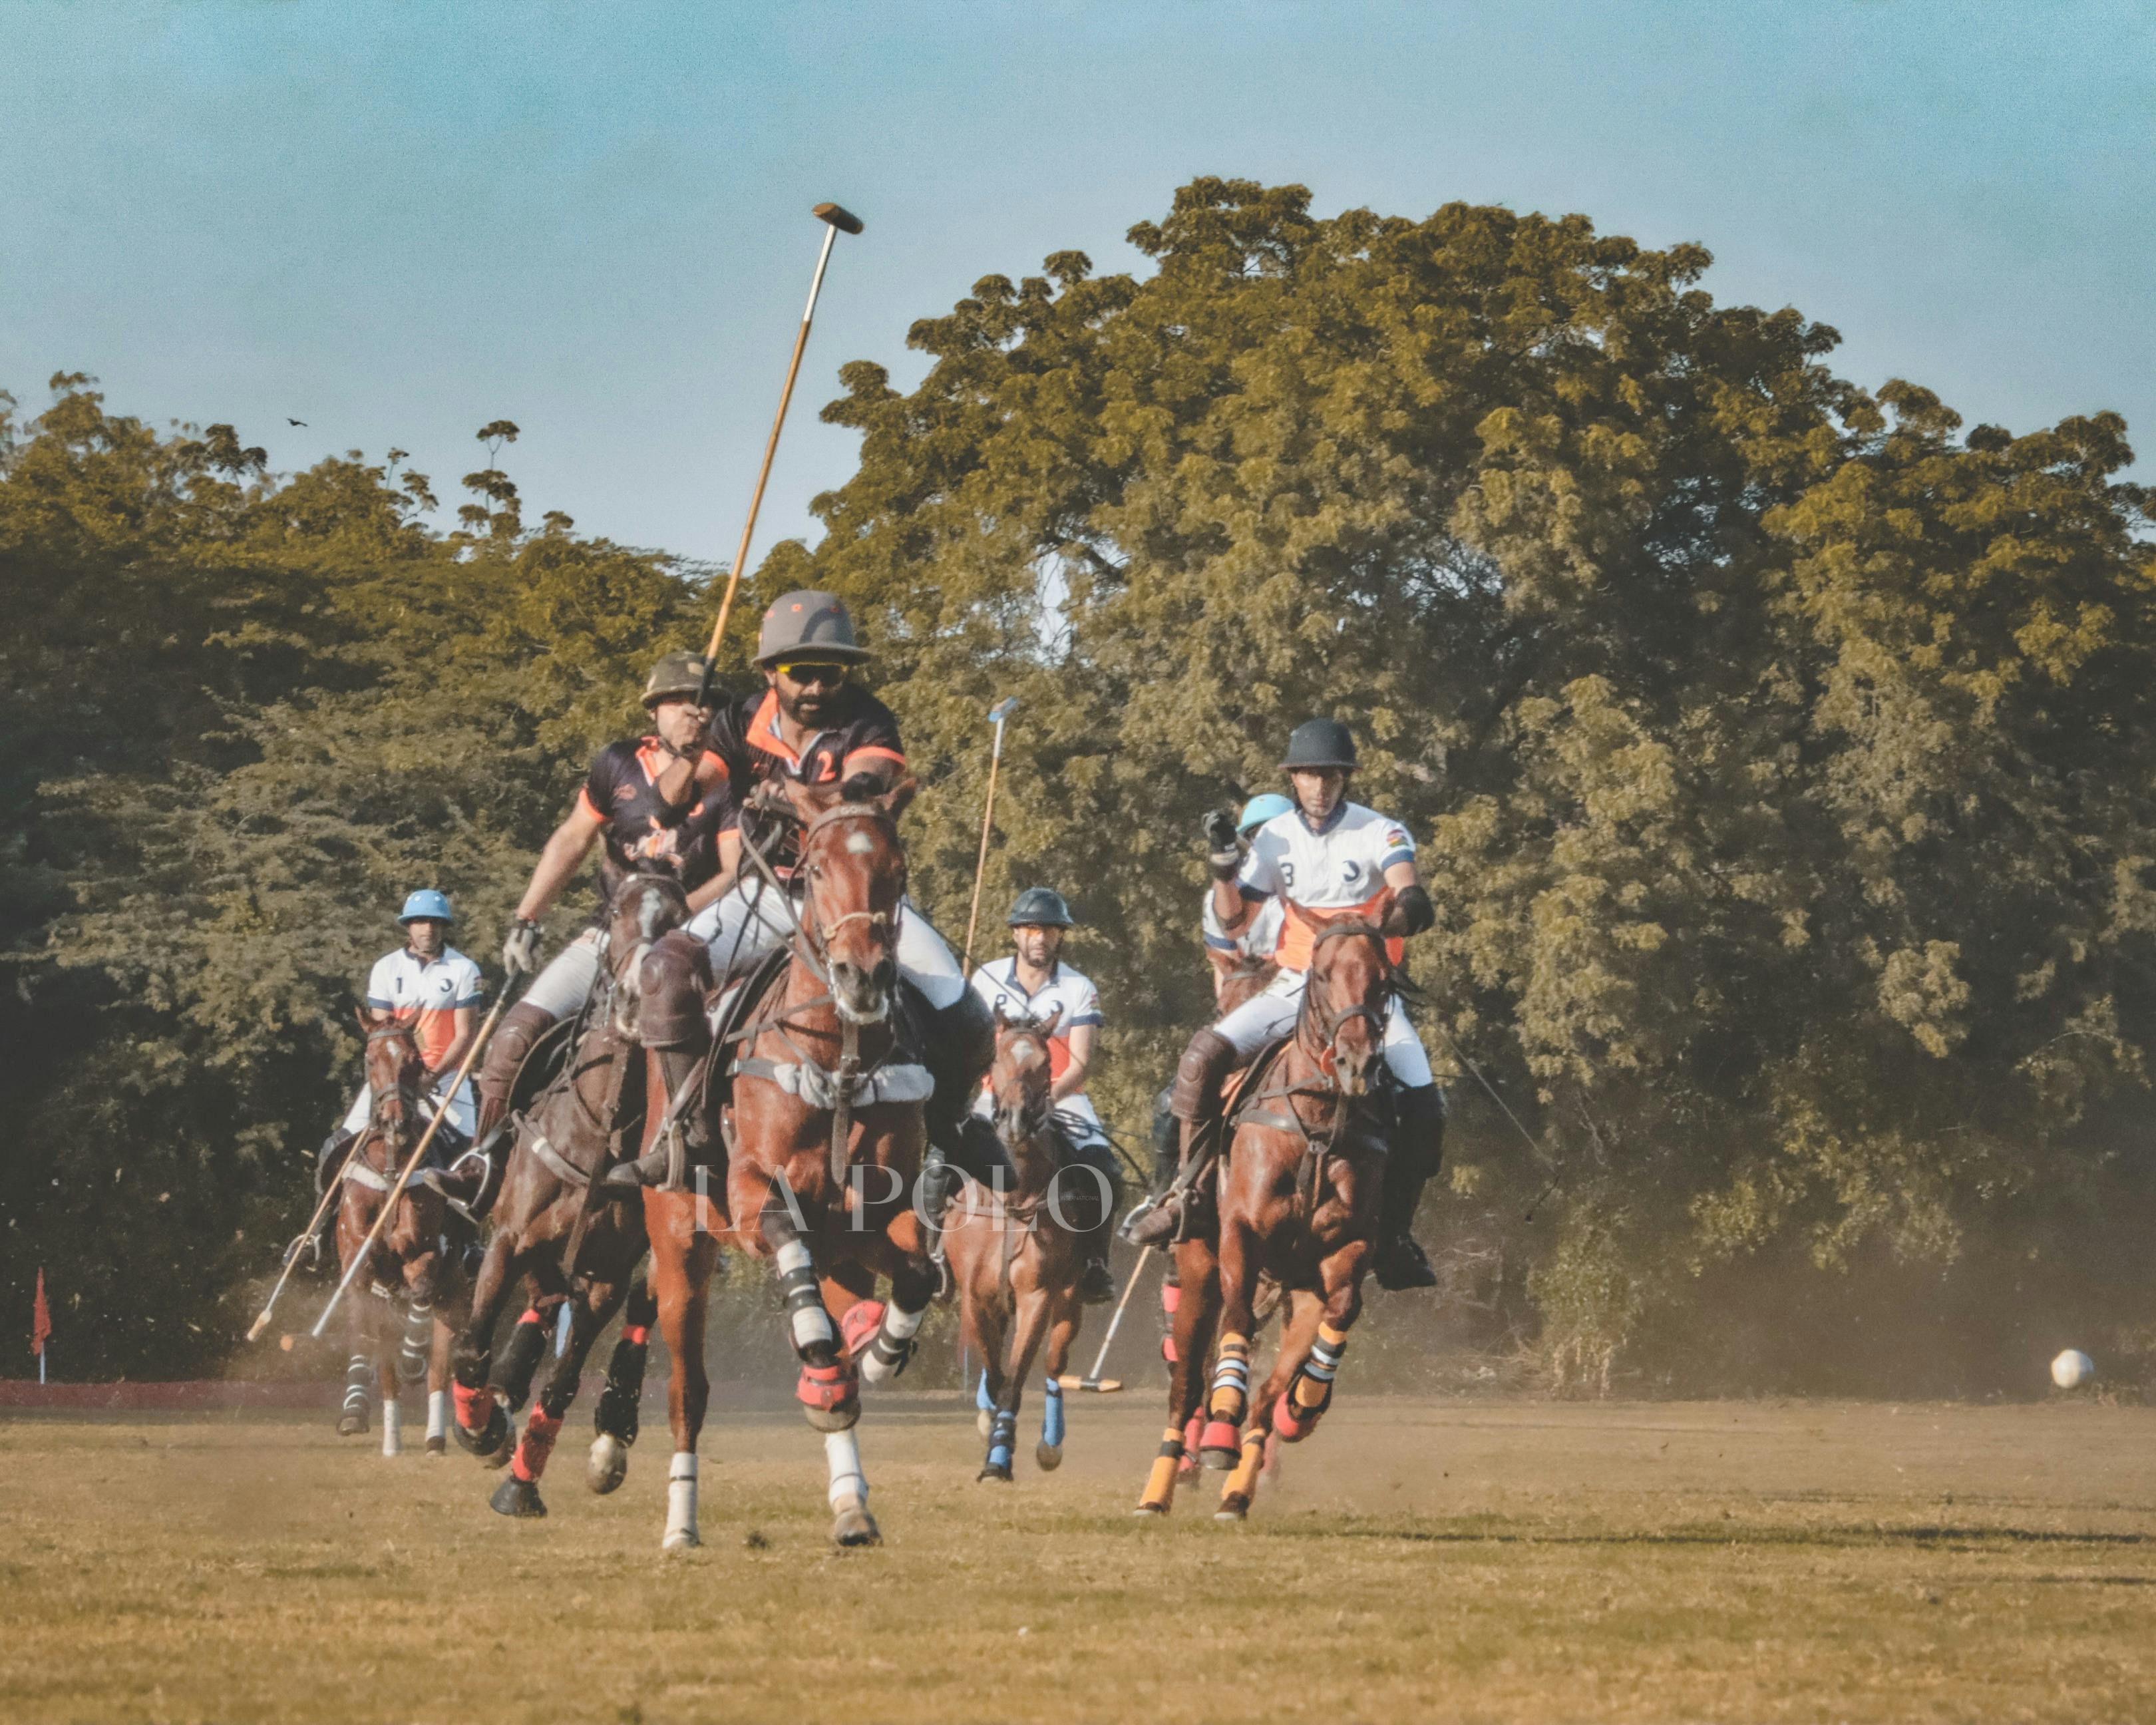 Jodhpur Polo Factory and KJS Achievers in action on day 2 of the tournament